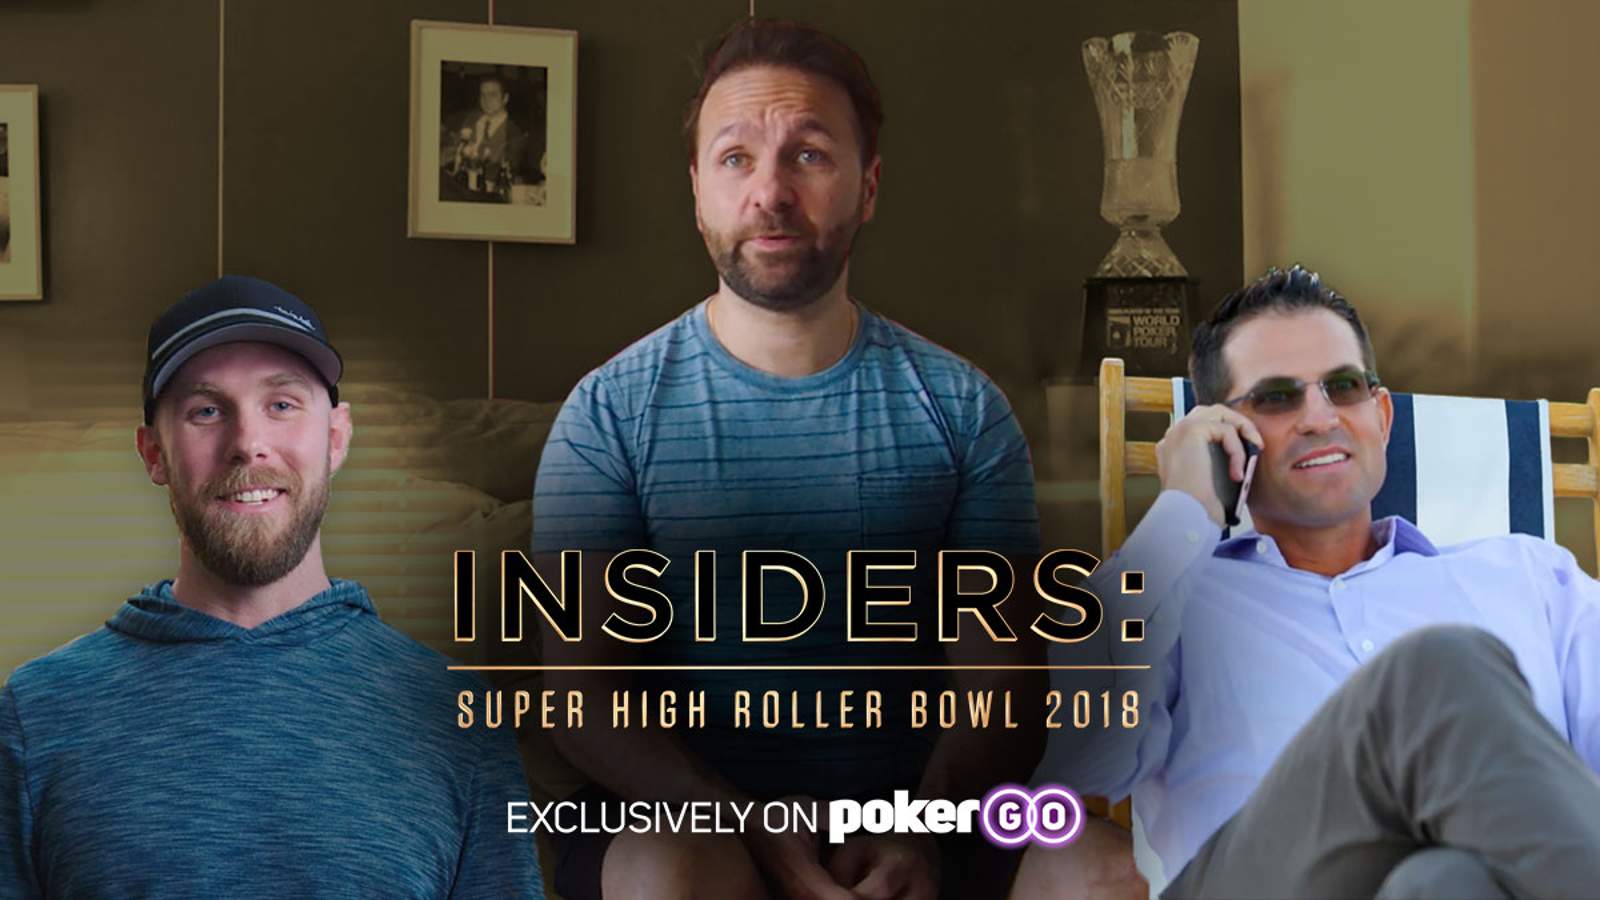 Poker Central Announces New Documentary Series "INSIDERS: Super High Roller Bowl 2018"